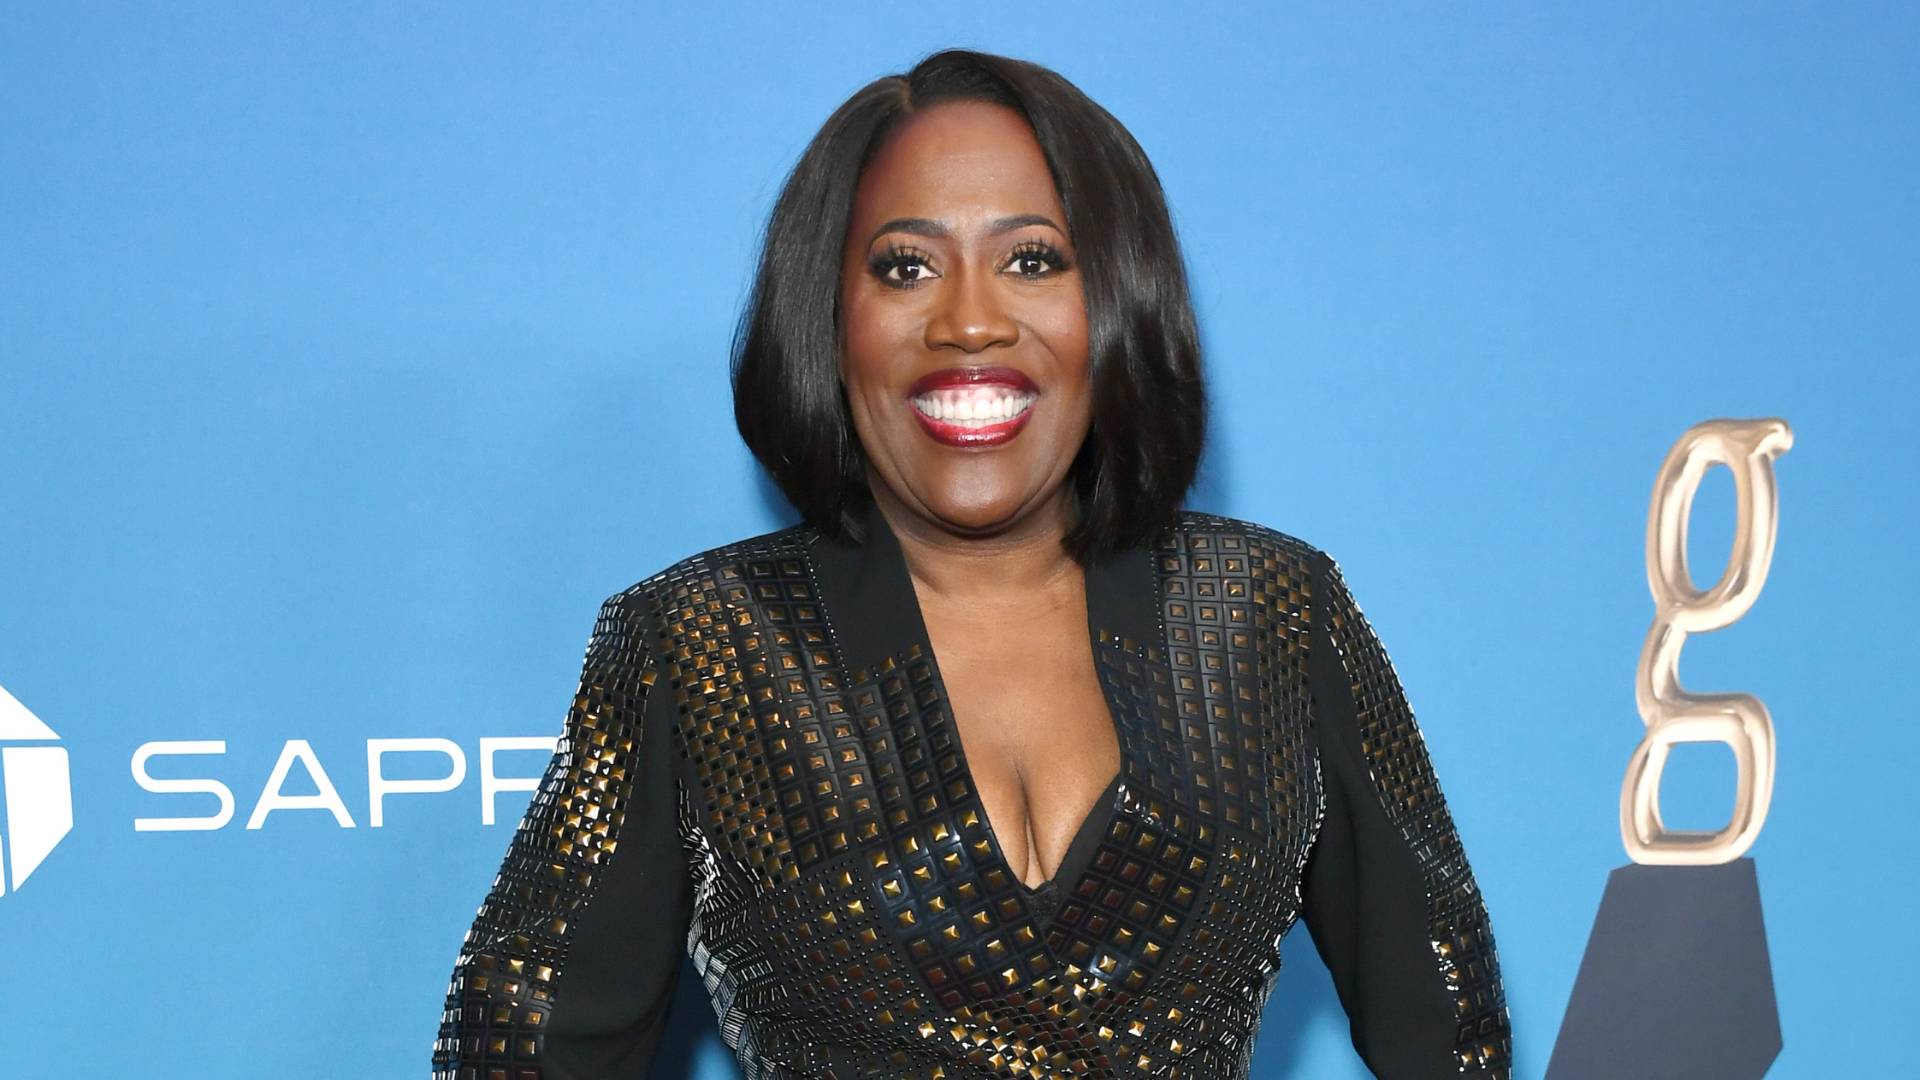 Sheryl Underwood attends TheGrio Awards 2022 at The Beverly Hilton on October 22, 2022 in Beverly Hills, California. 